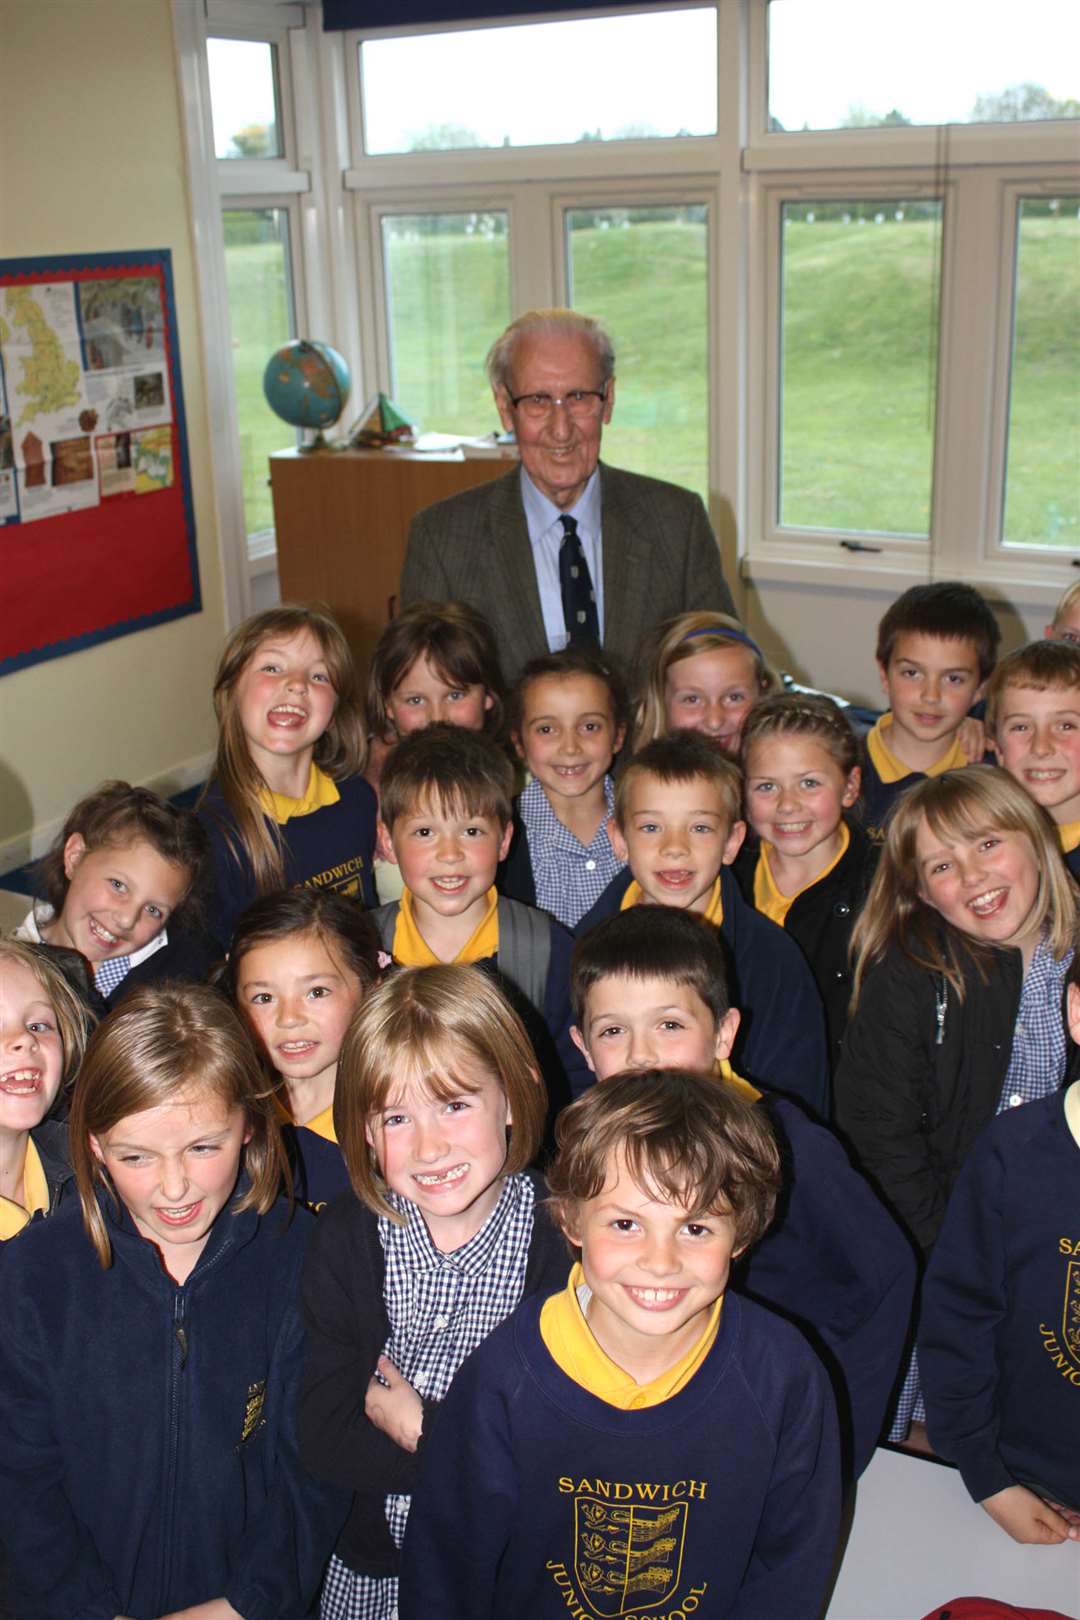 Mr Chesterfield with pupils at Sandwich Junior School